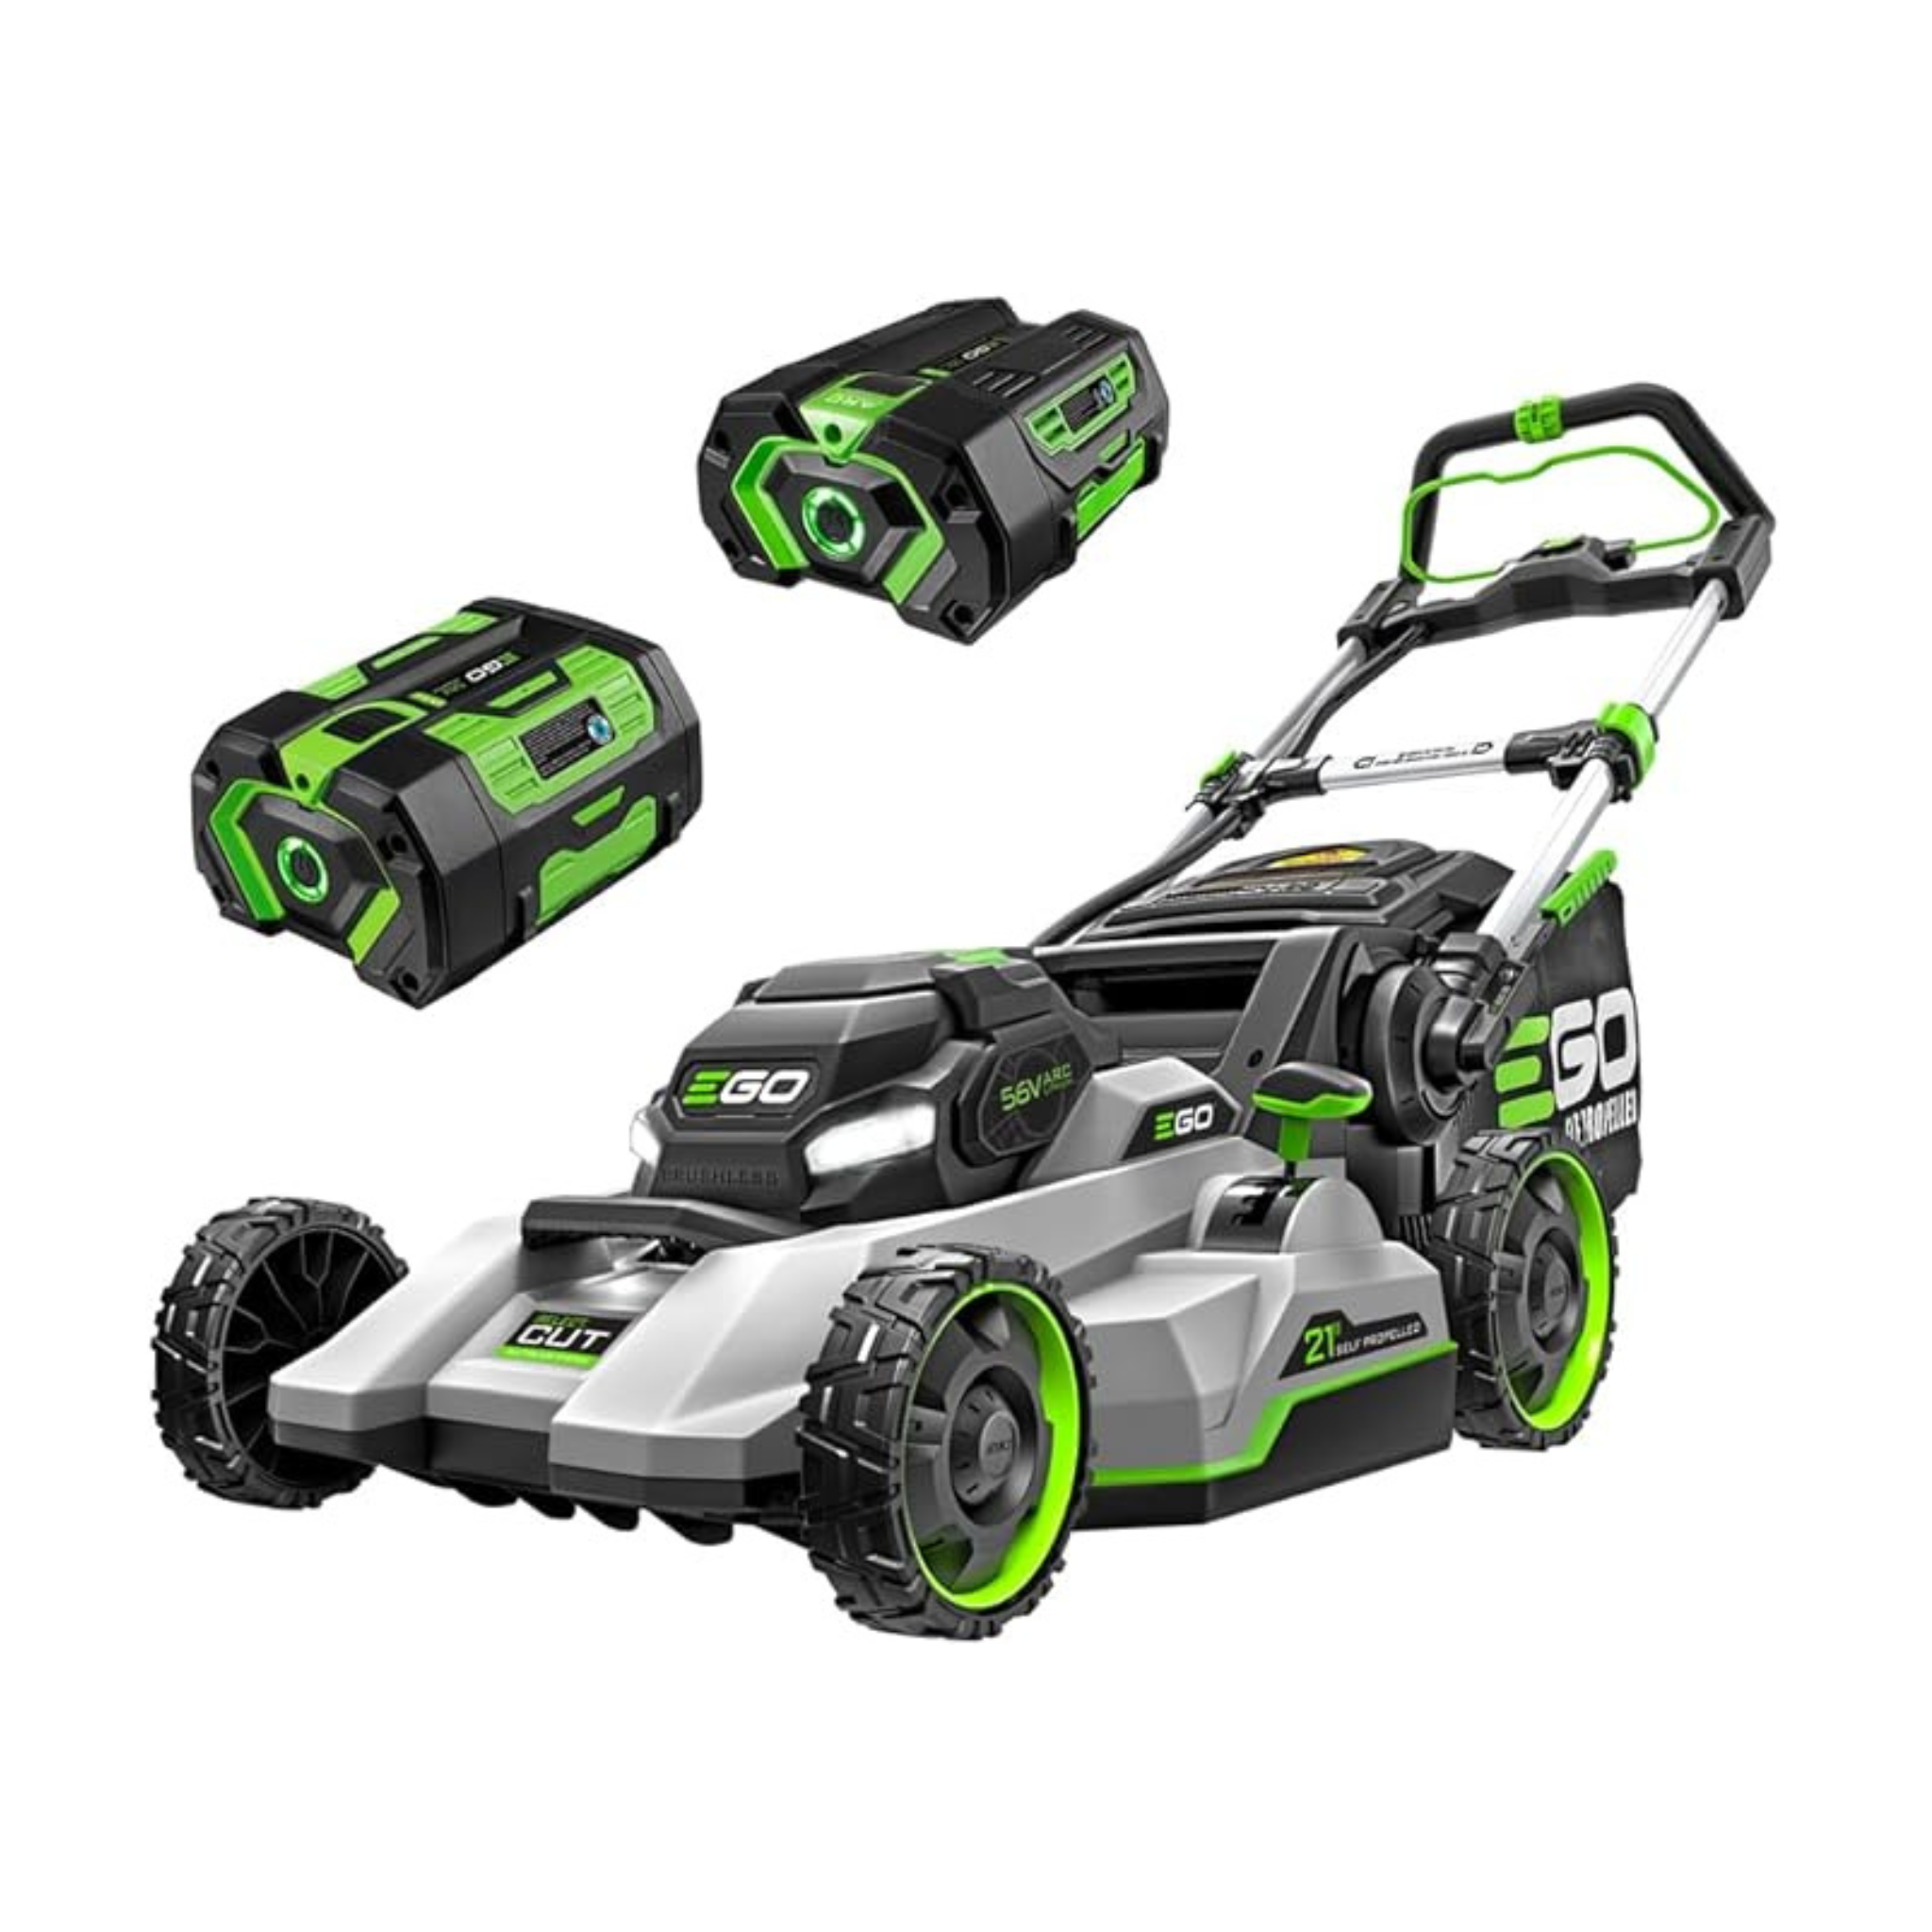 Ego Power+ 21" 56V Self-Propelled Lawn Mower w/ 7.5Ah + 5Ah Battery & Charger